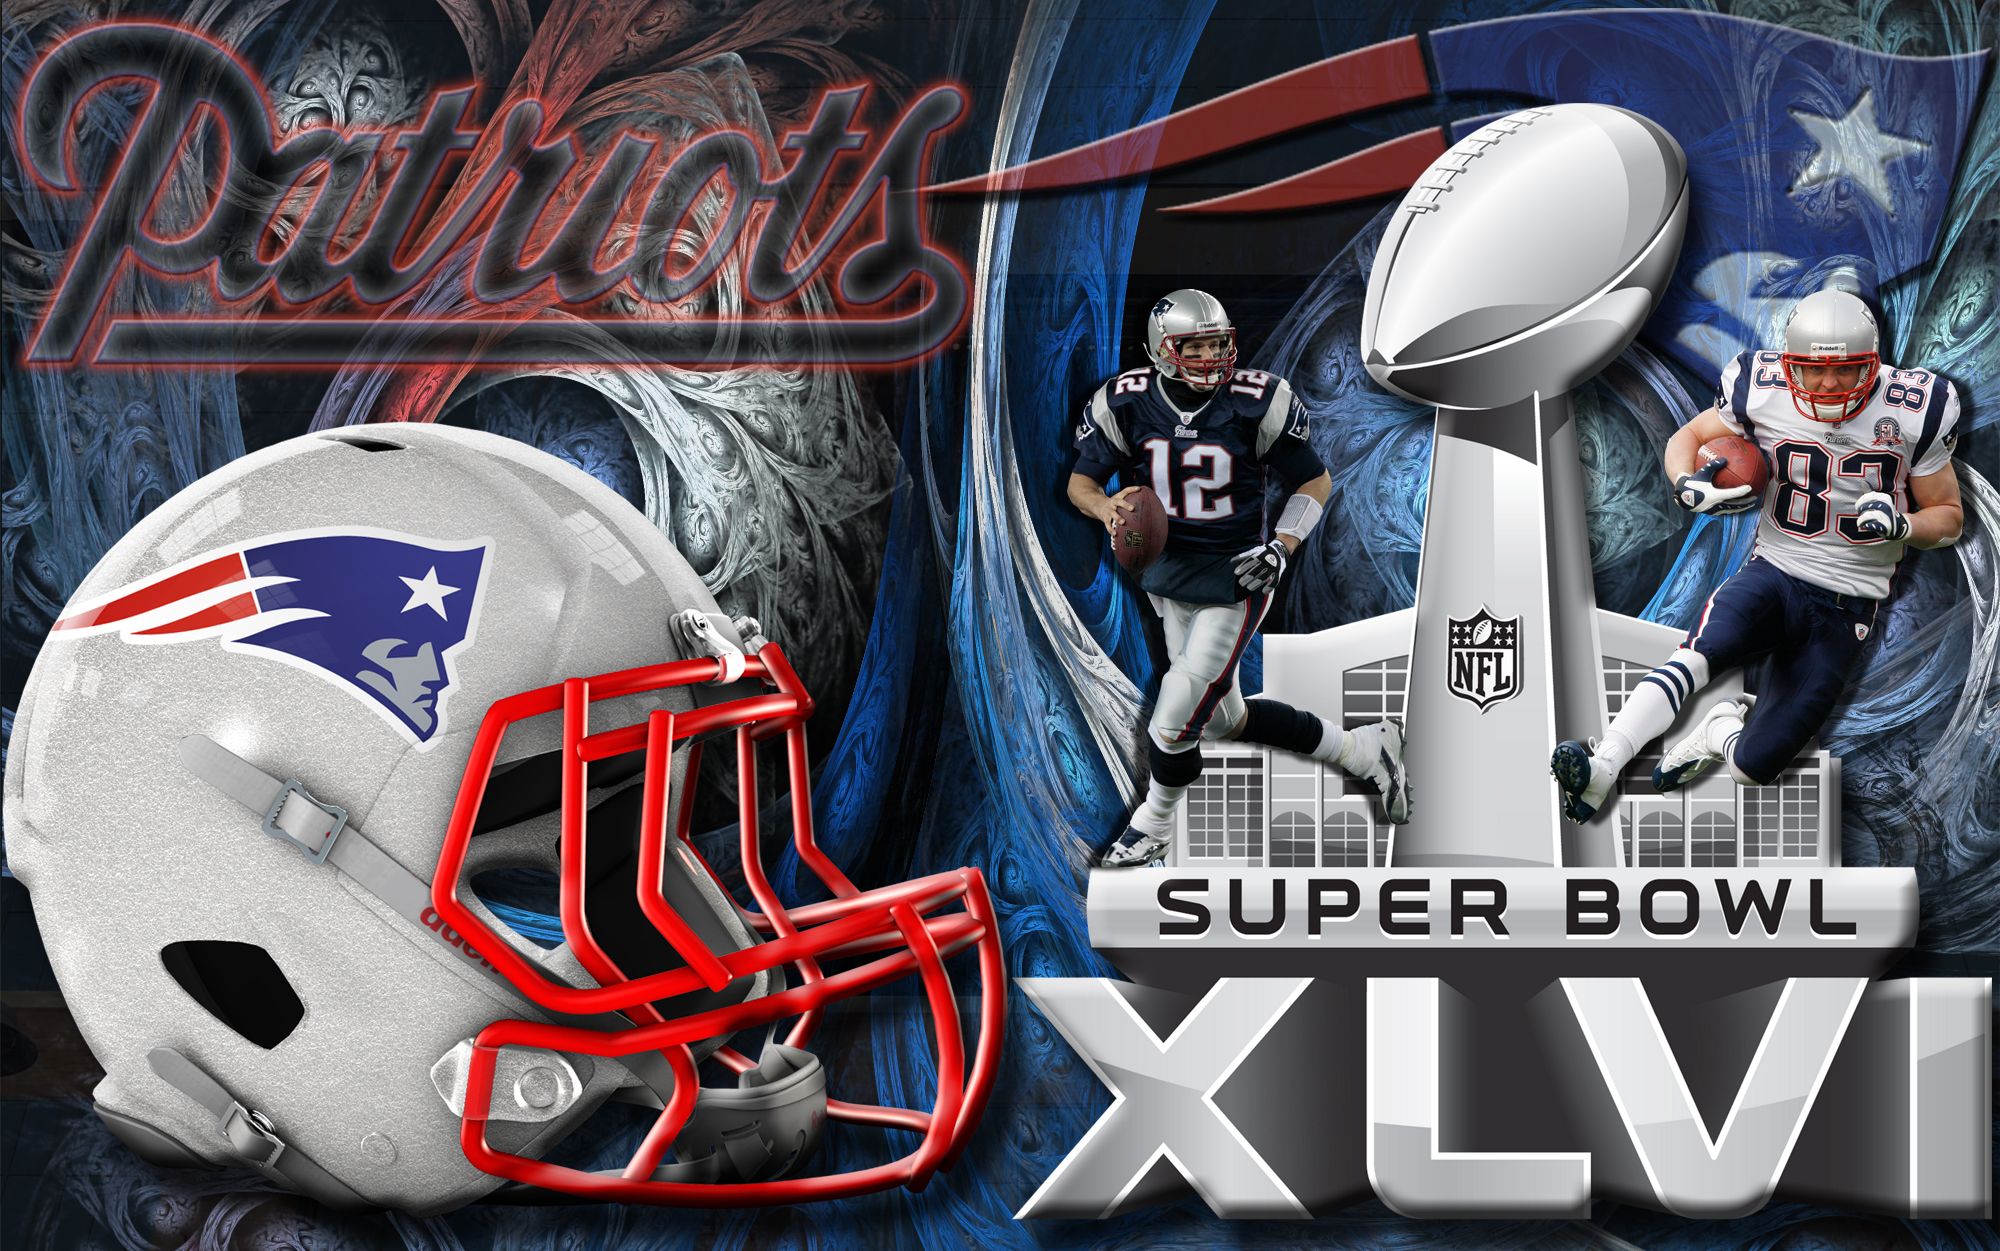 2000x1251 Wallpaper By Wicked Shadows New England Patriots Super Bowl Wallpaper